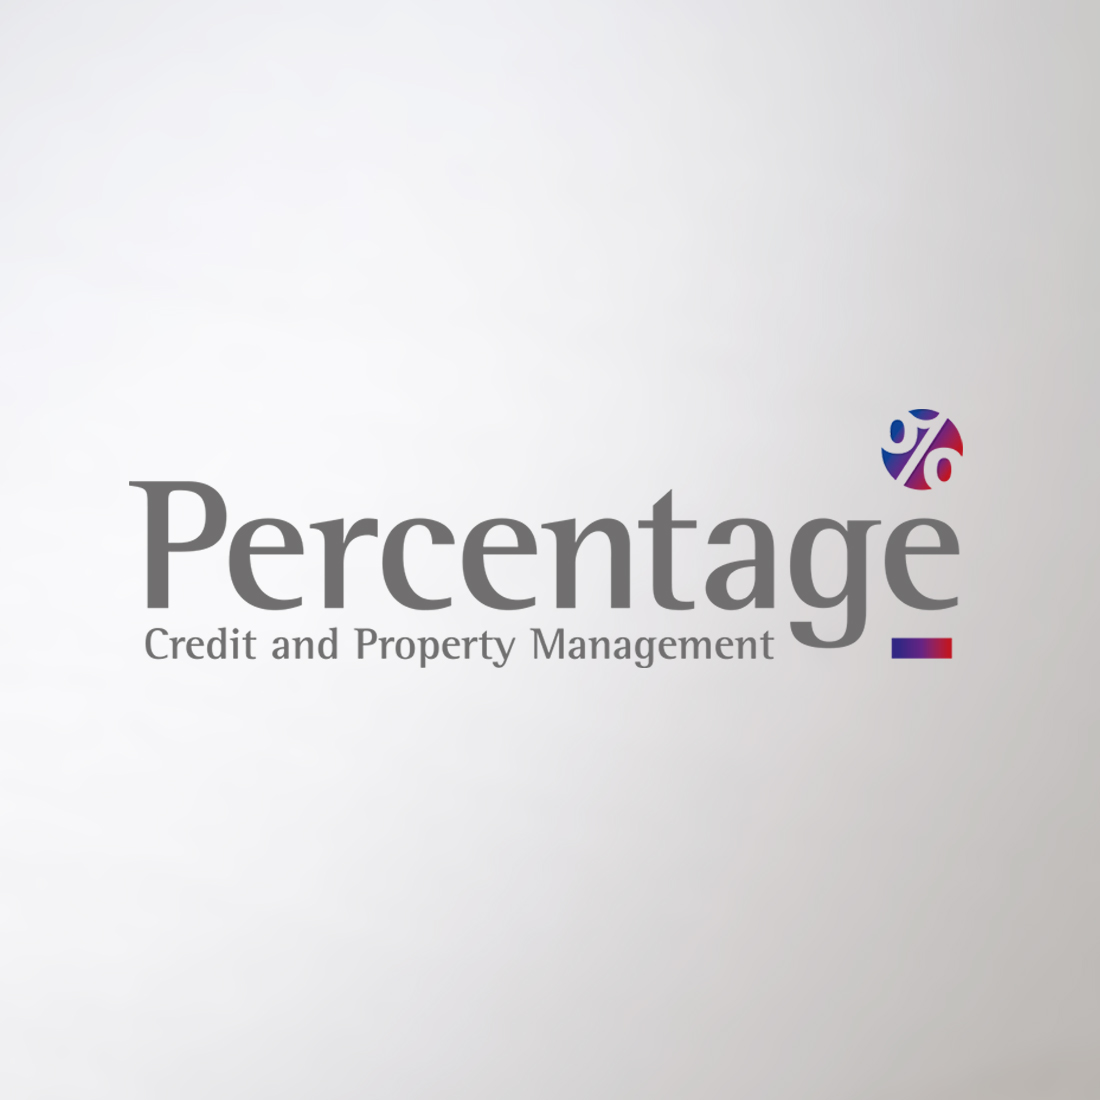 Corporate identity Percentage Credit and Property Management